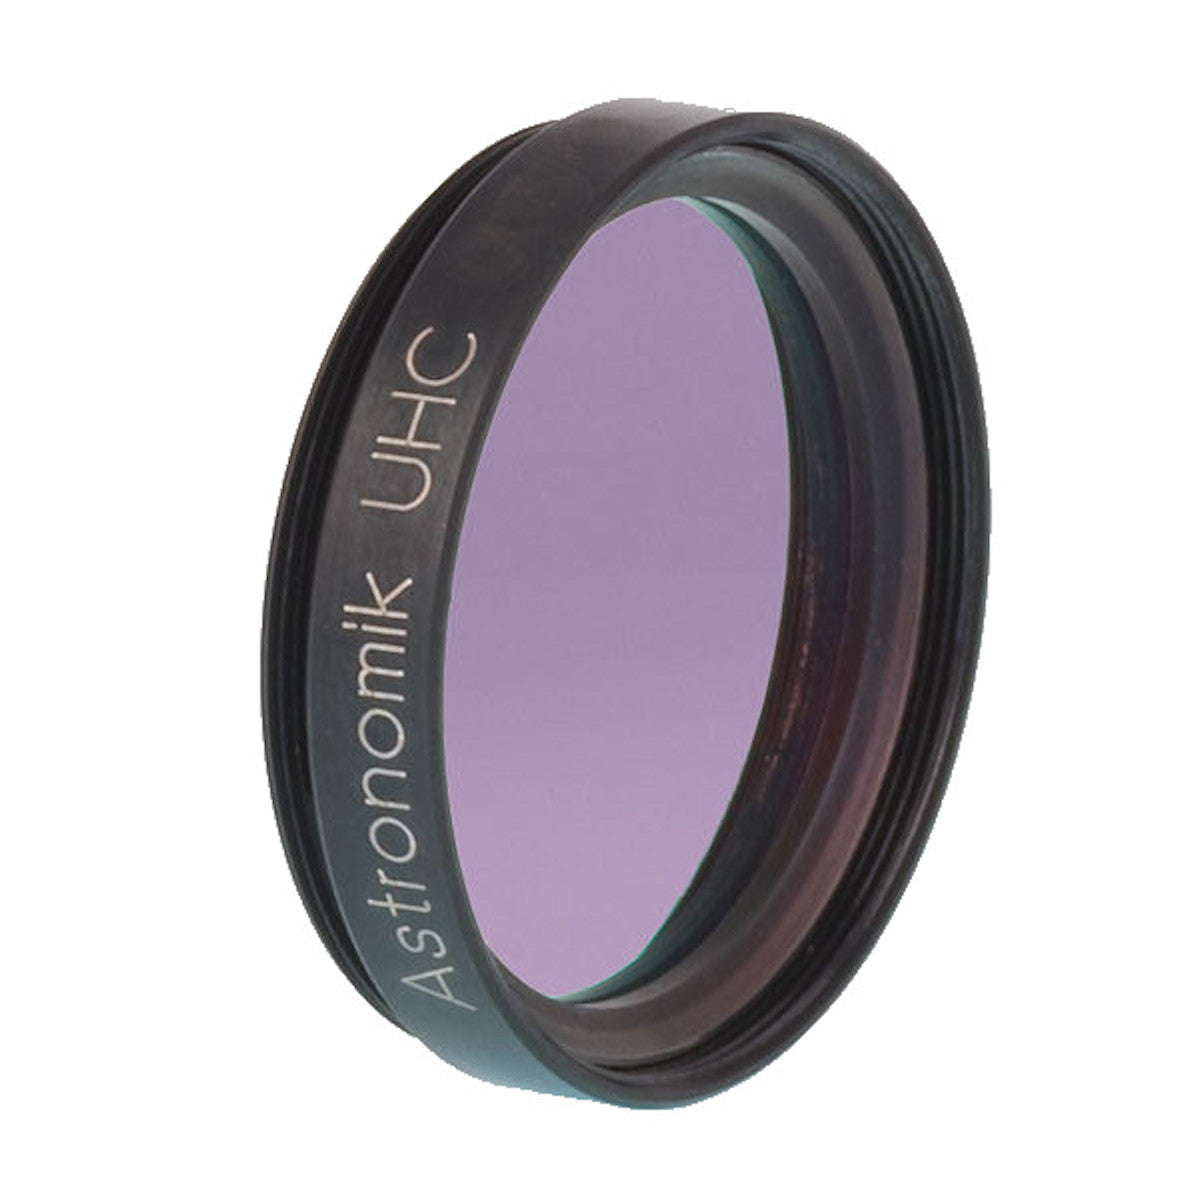 Astronomik Filters Now Available at Telescopes Canada!